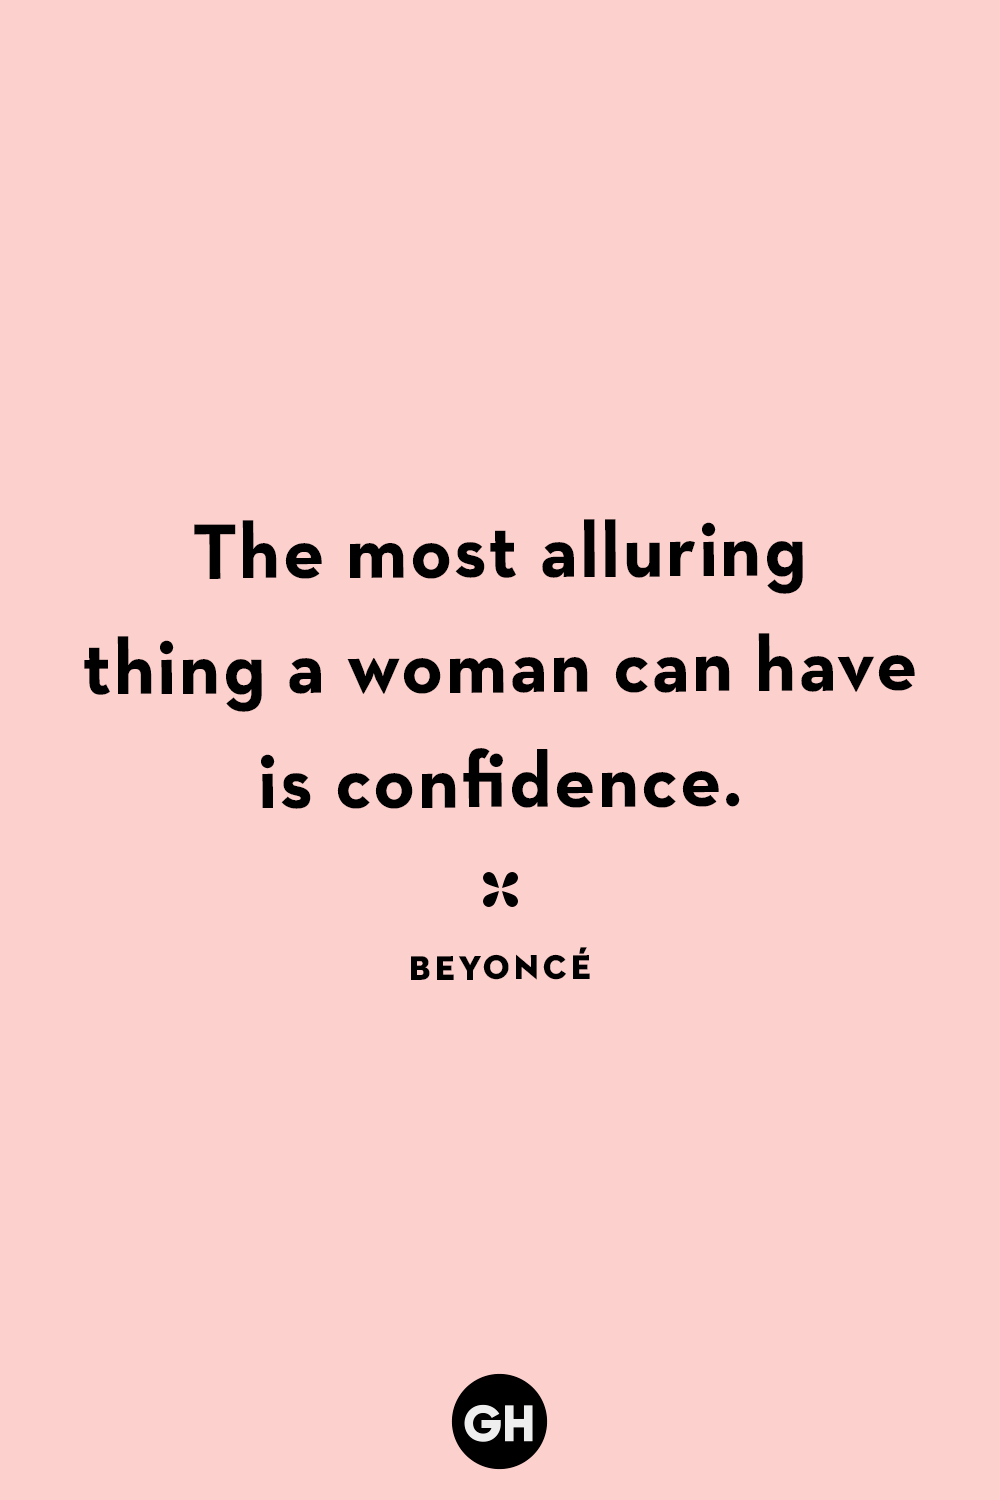 beyonce quotes about success